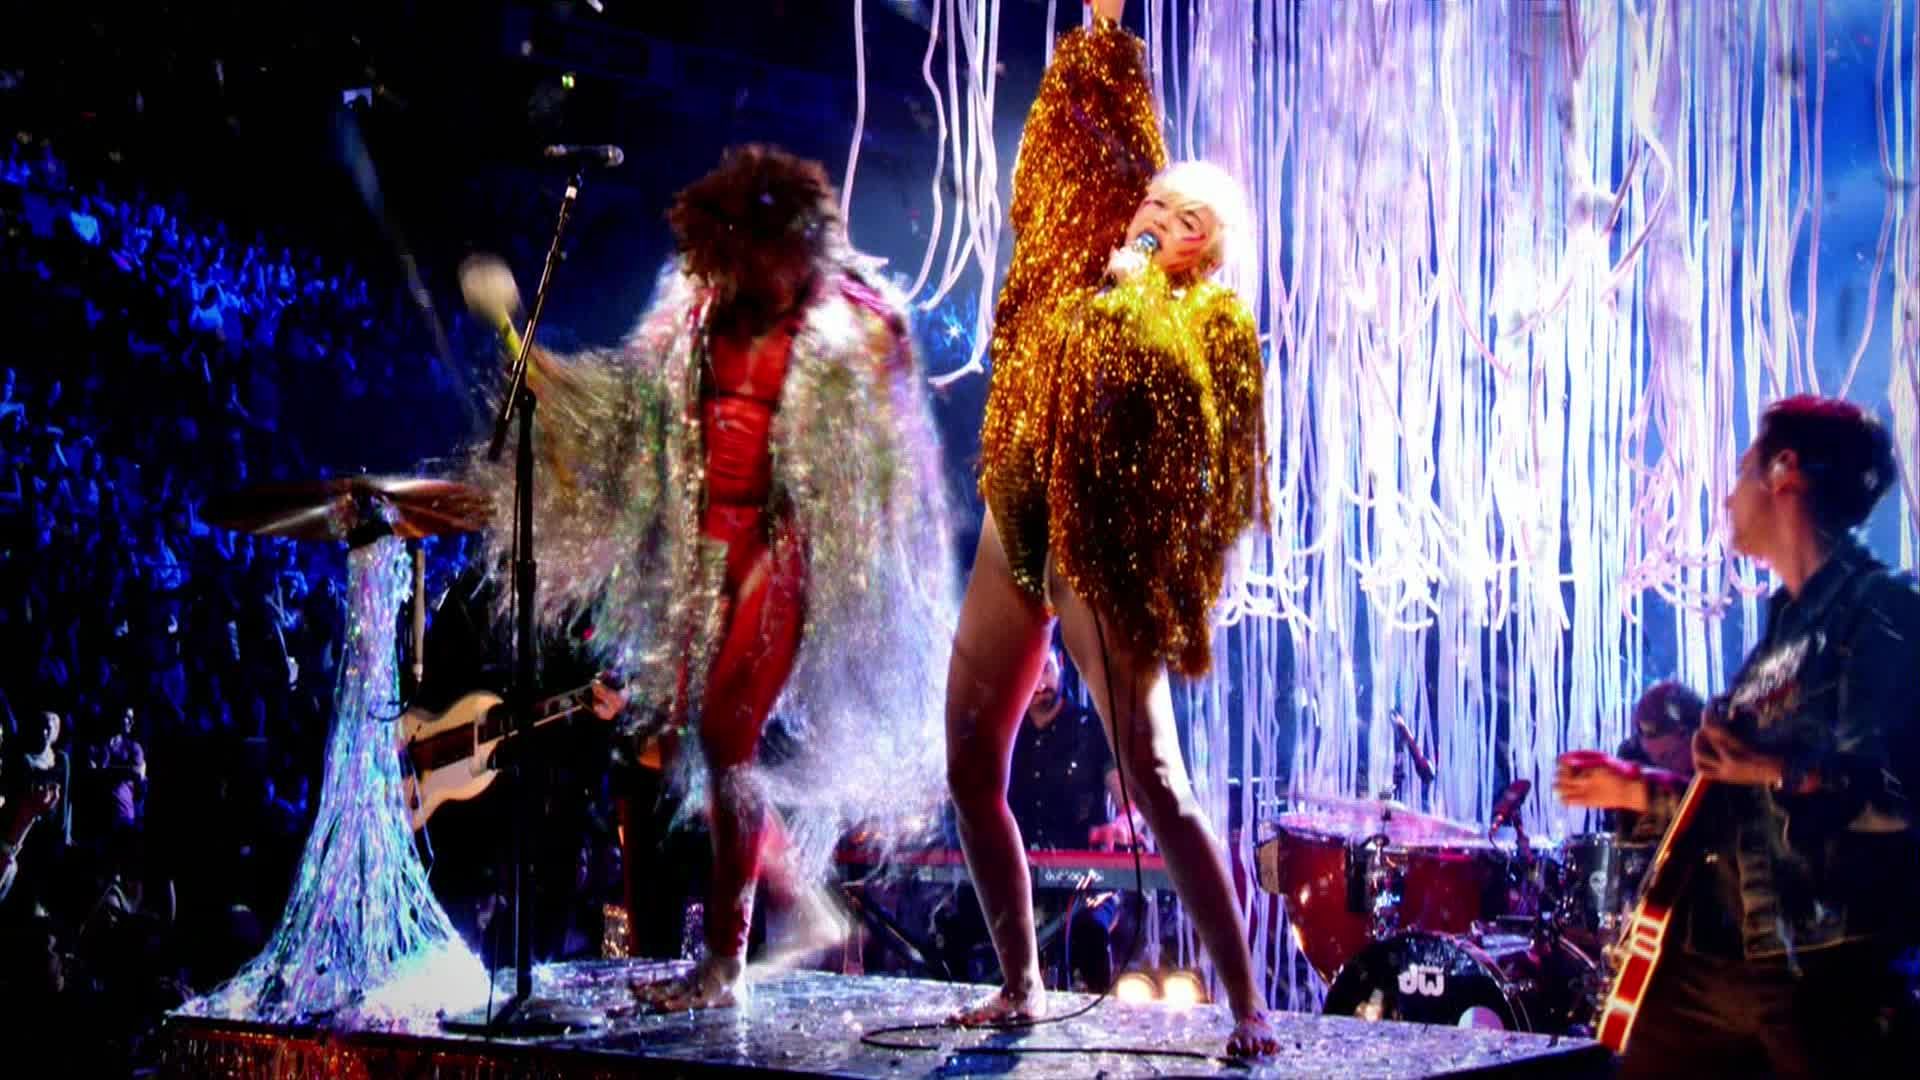 Miley Cyrus [ft The Flaming Lips] - 2014-05-18, Billboard Music Awards - 1080 TS - LSD preview 19